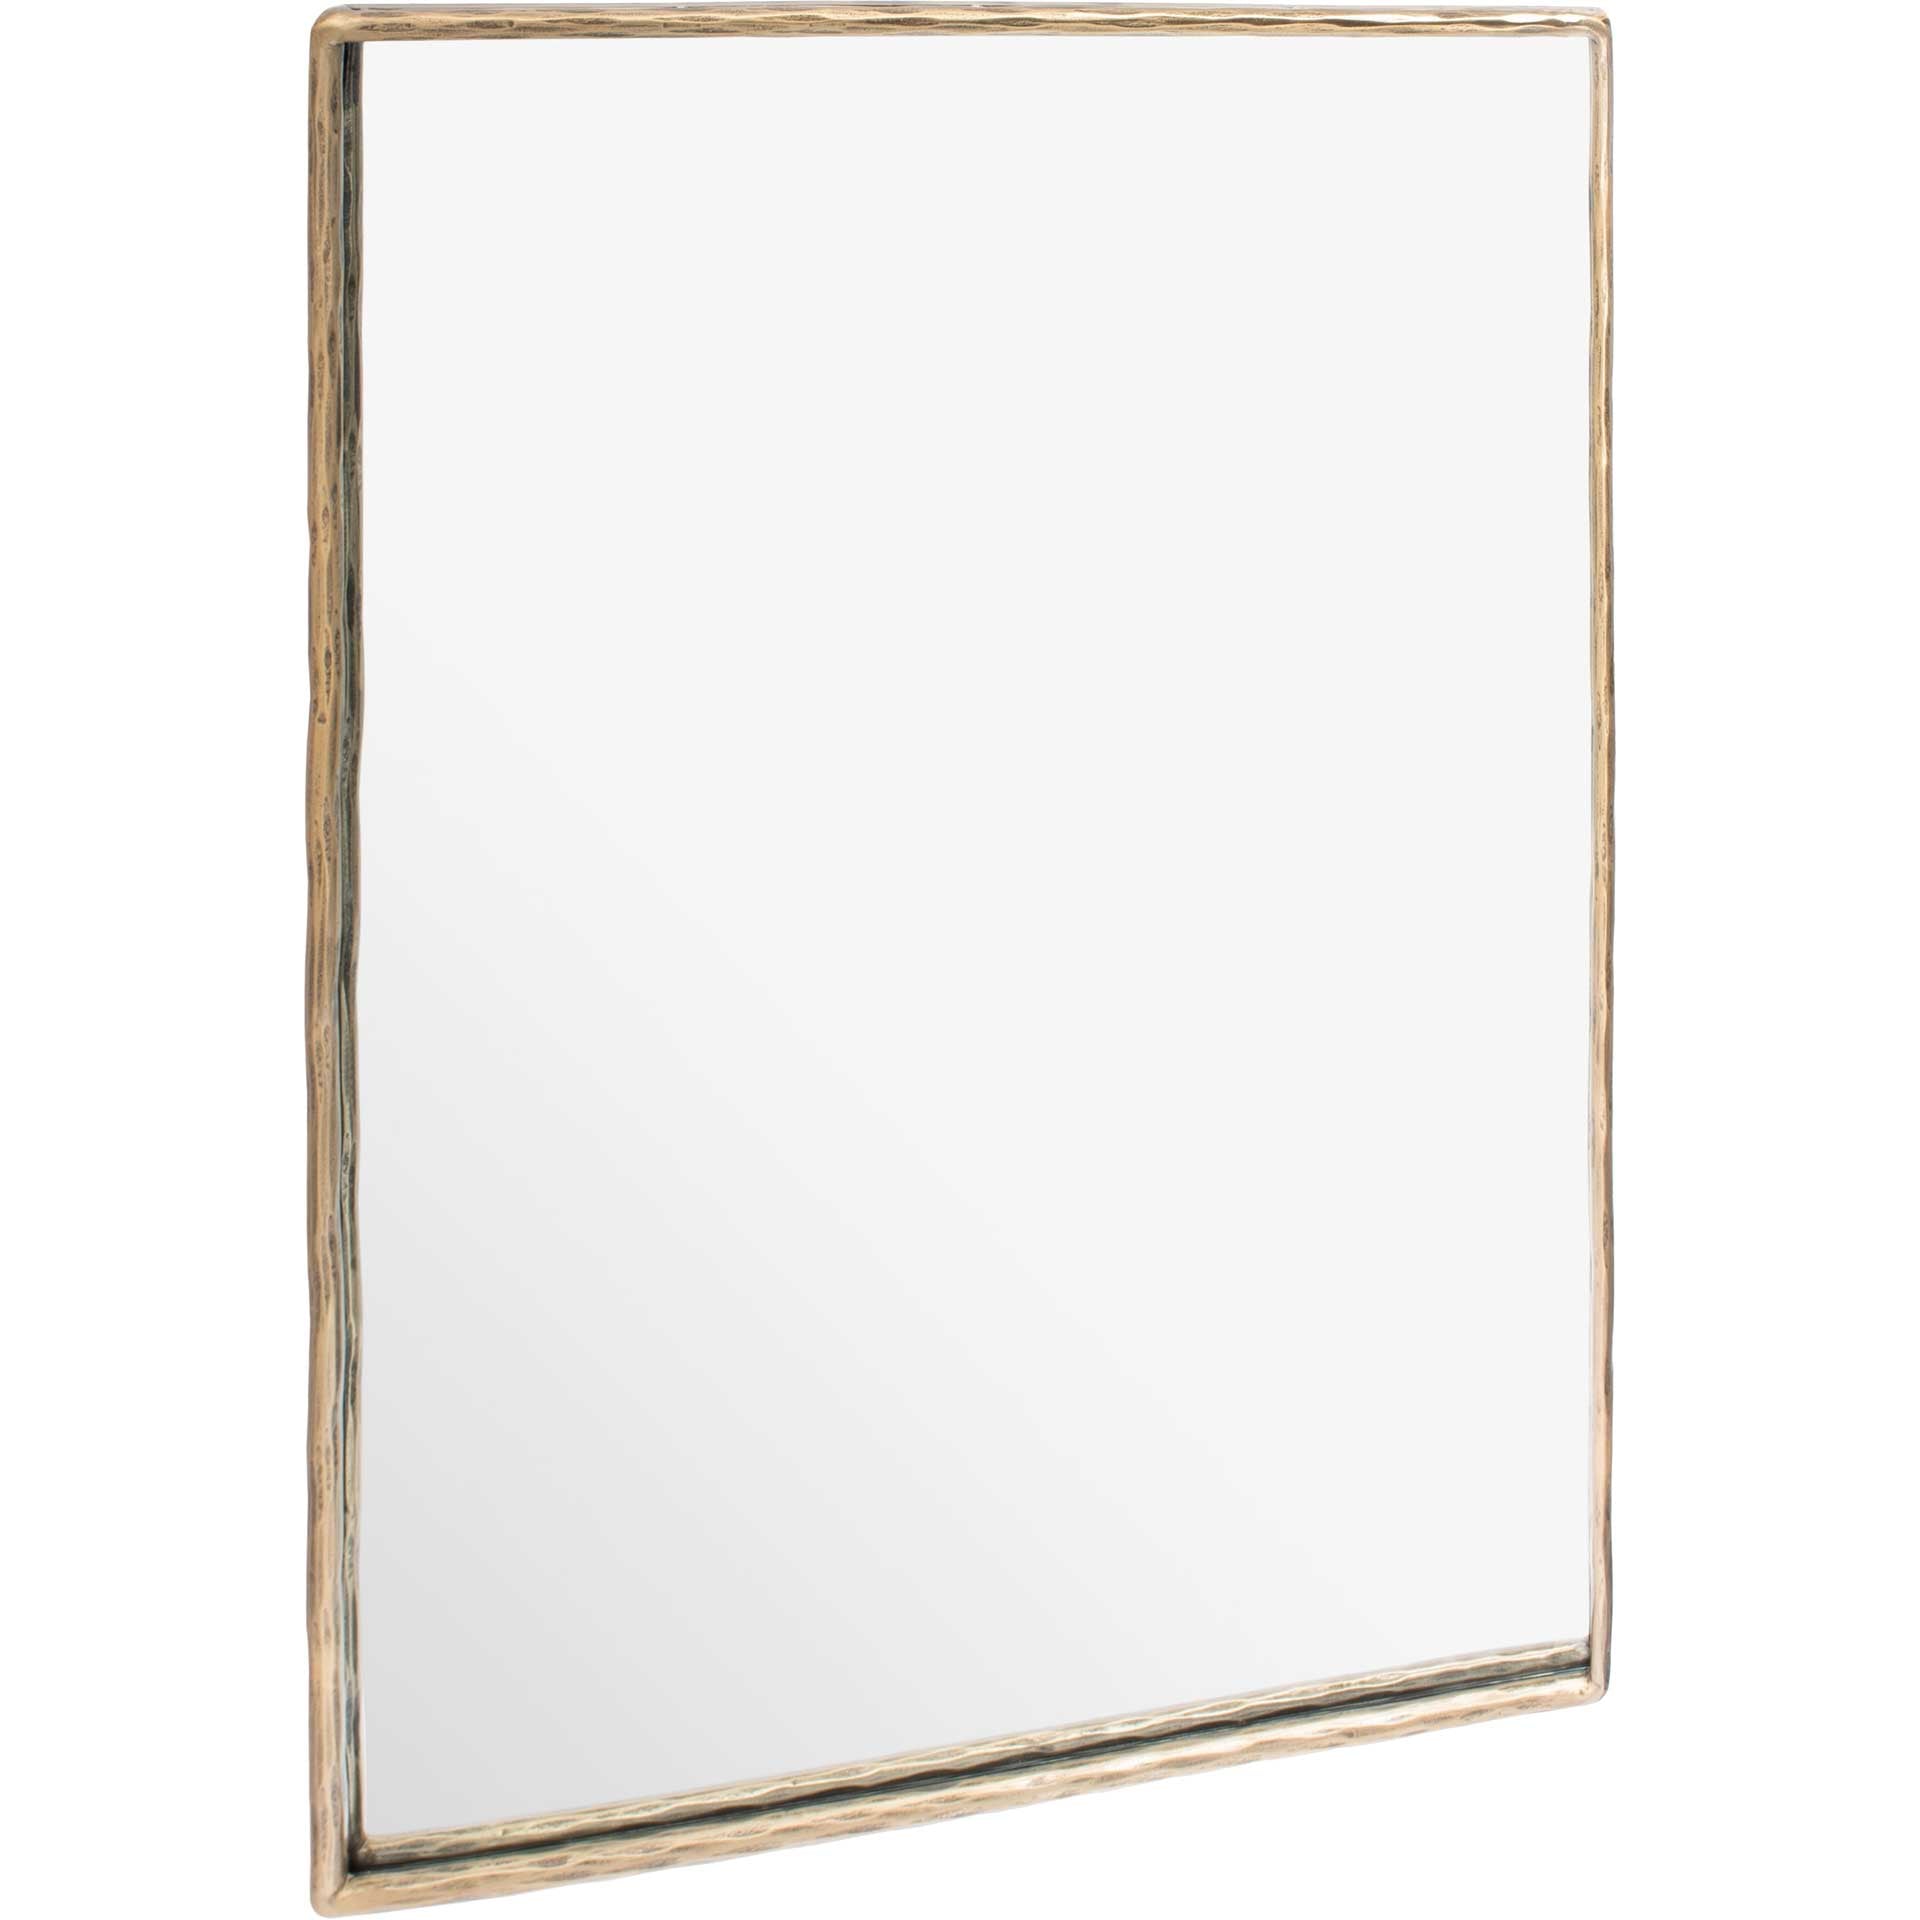 Tranquility Large Rectangle Mirror Brass